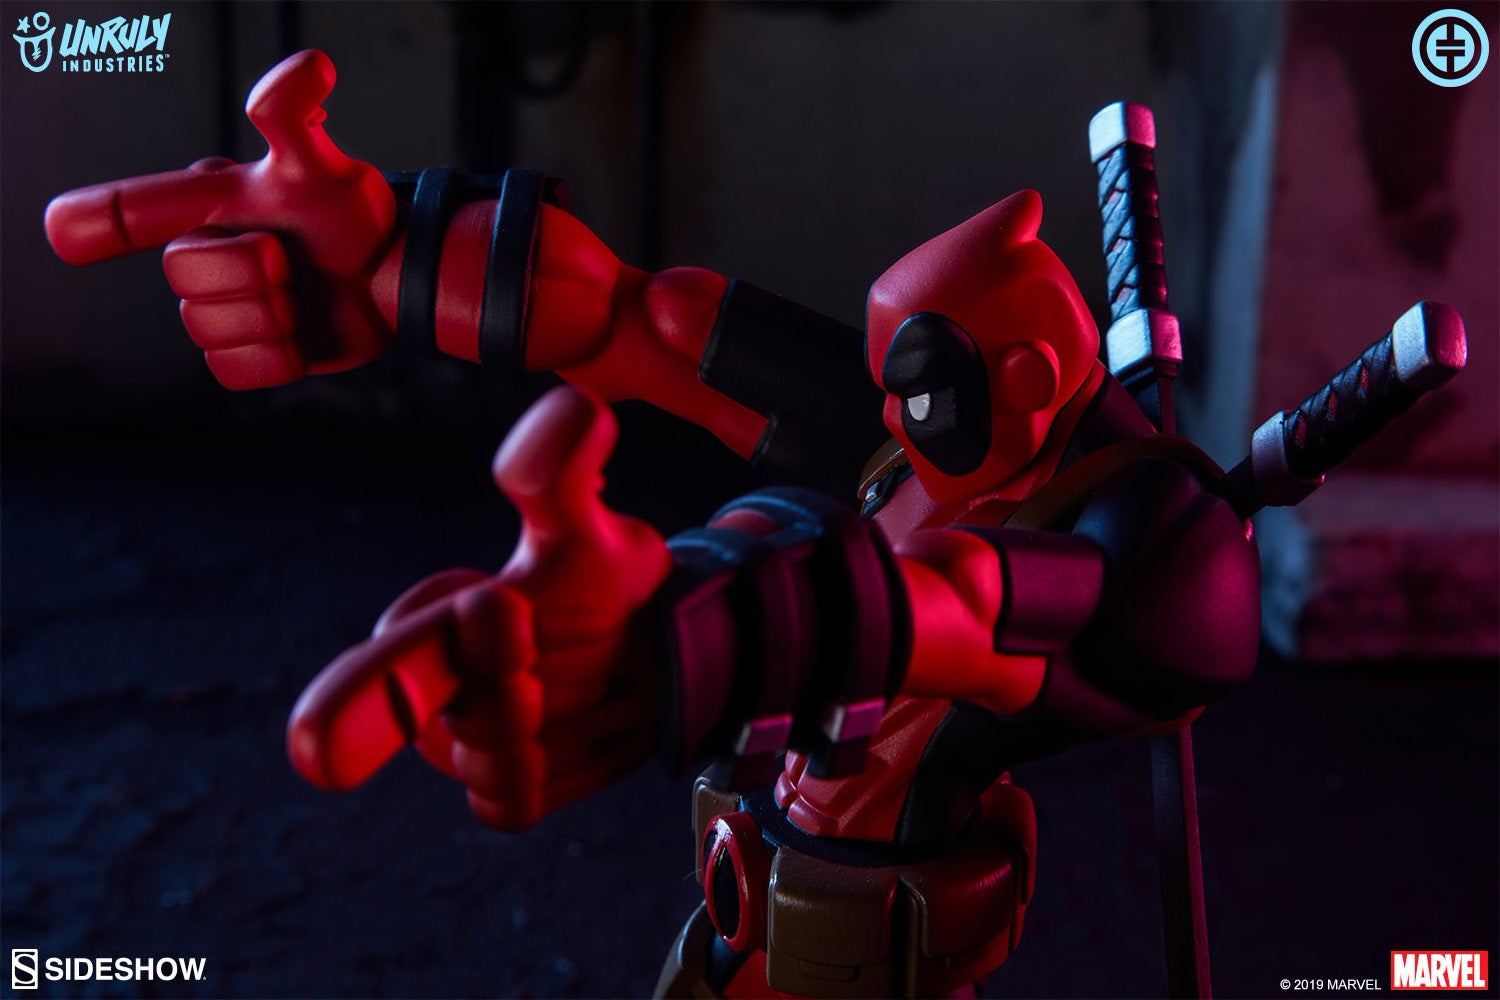 Sideshow Collectibles - Unruly Industries - Marvel - Wade Wilson (Deadpool) by Tracy Tubera - Marvelous Toys